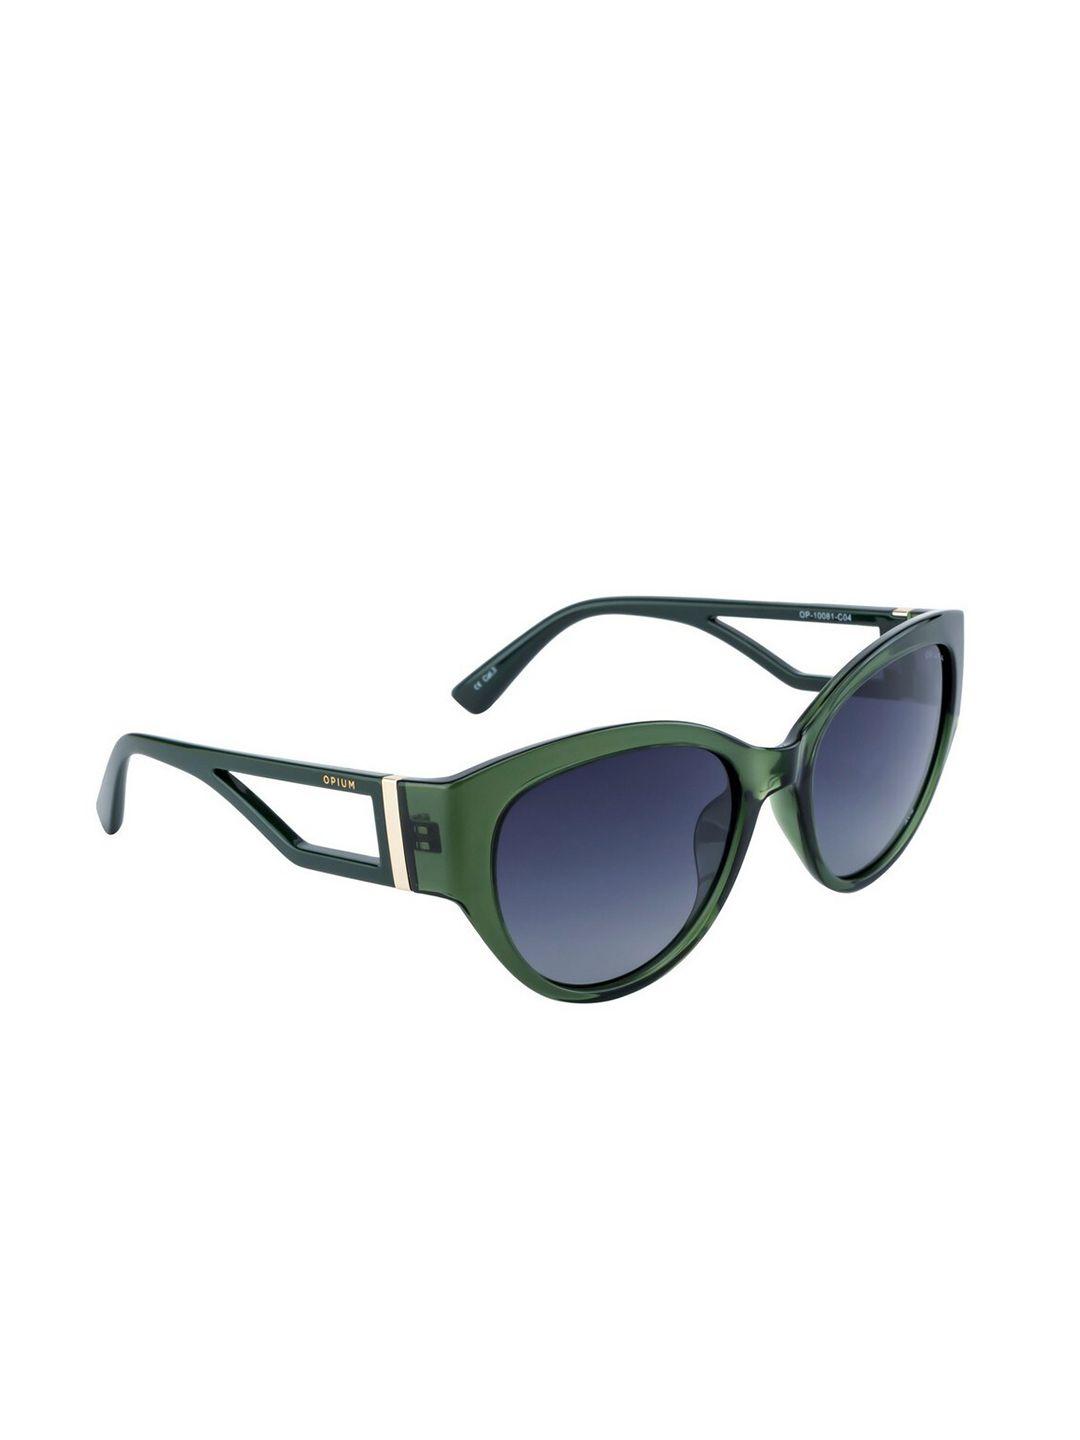 opium women blue lens & green oval sunglasses with uv protected lens op-10081-c04